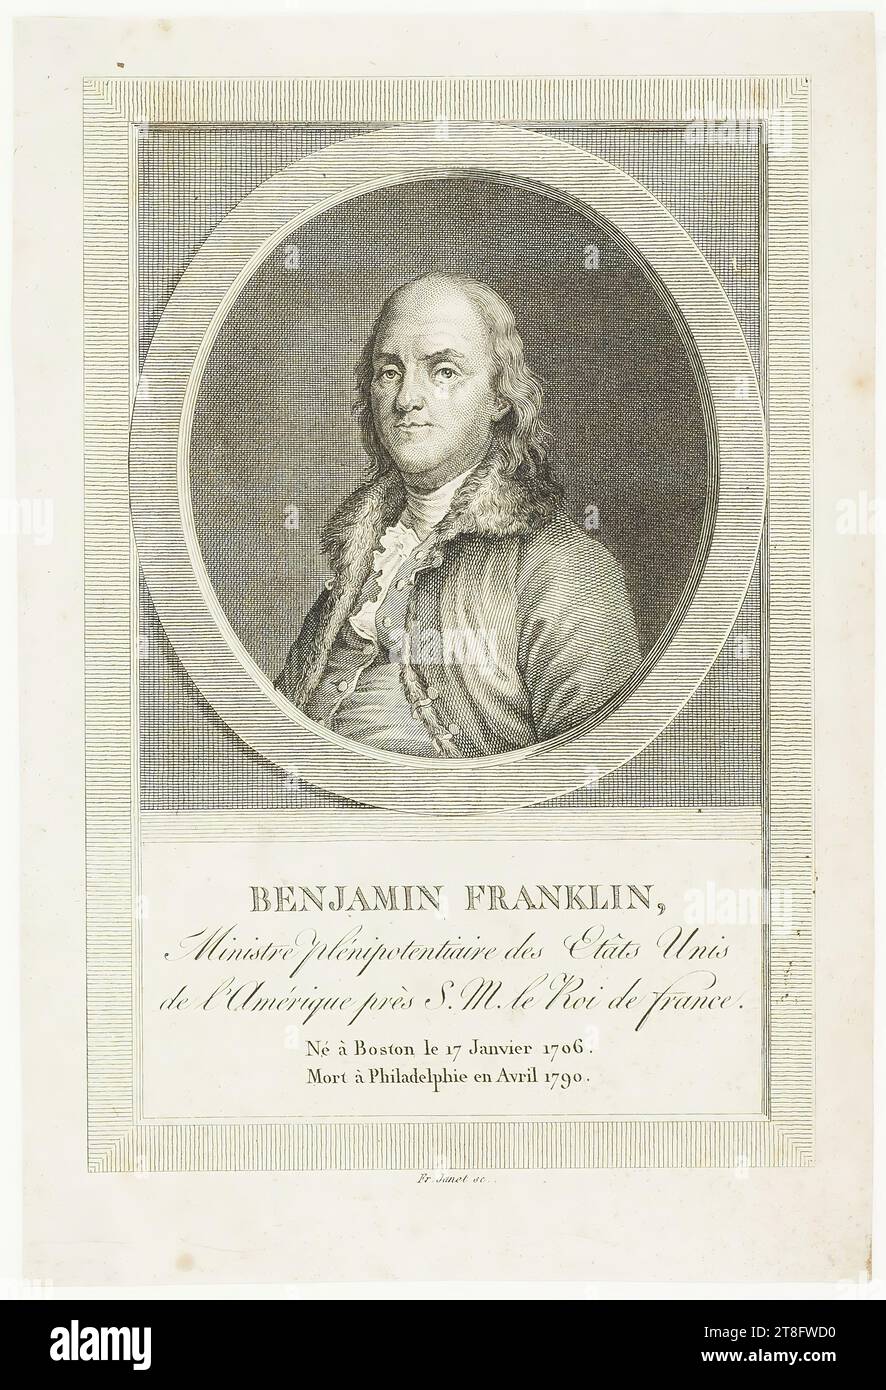 BENJAMIN FRANKLIN, Minister Plenipotentiary of the United States, of America to H.M. the King of France., Born in Boston on January 17, 1706., Died in Philadelphia in April 1790. Fr. Janet sc Stock Photo